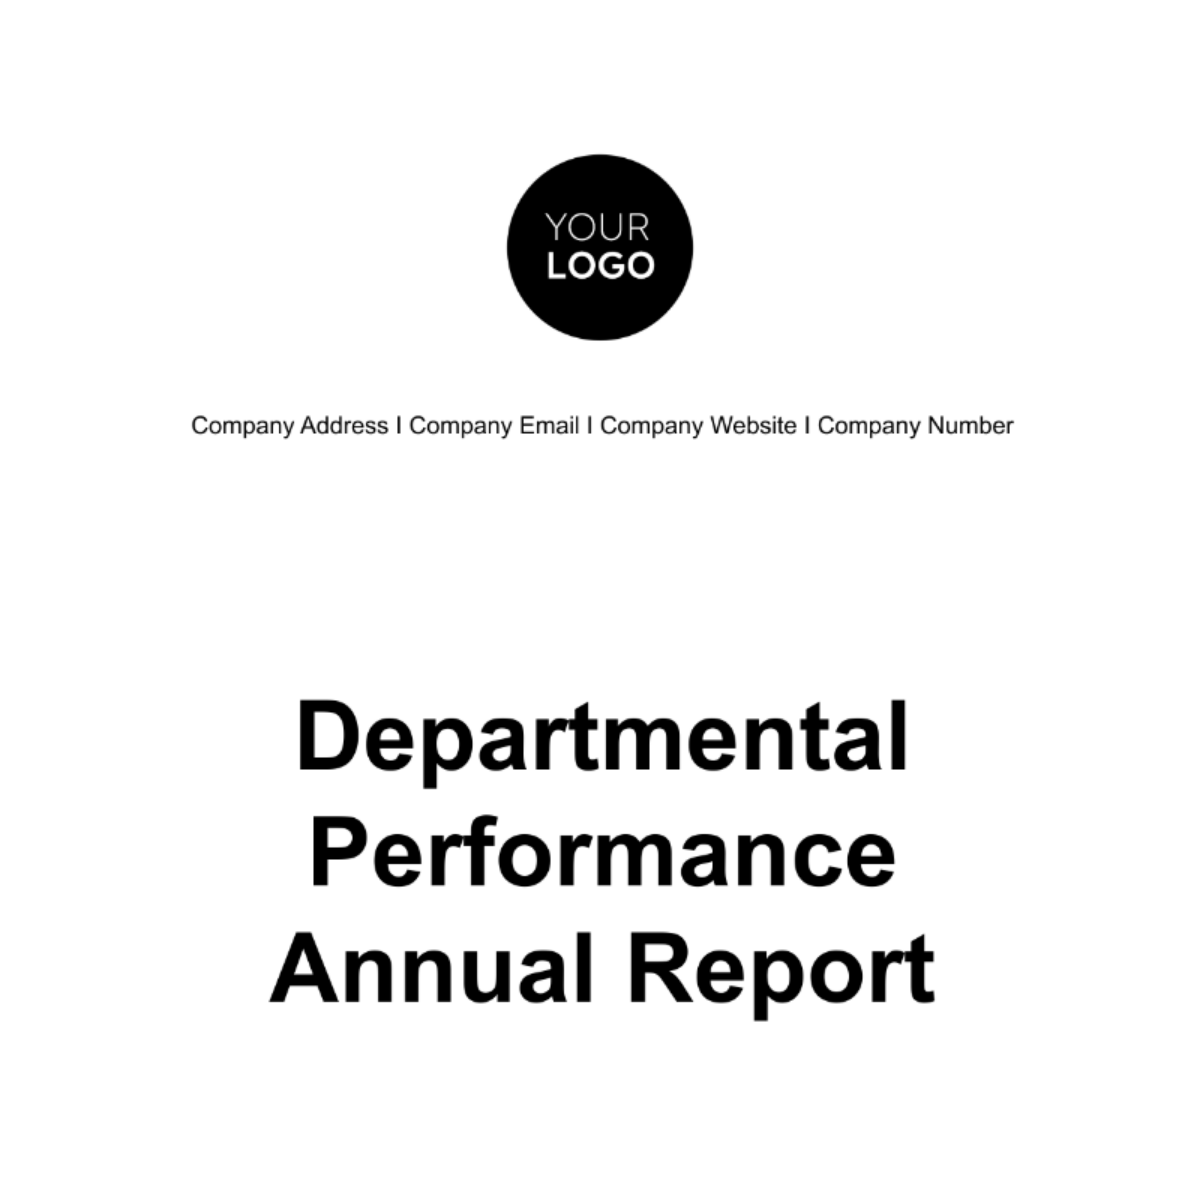 Free Departmental Performance Annual Report HR Template